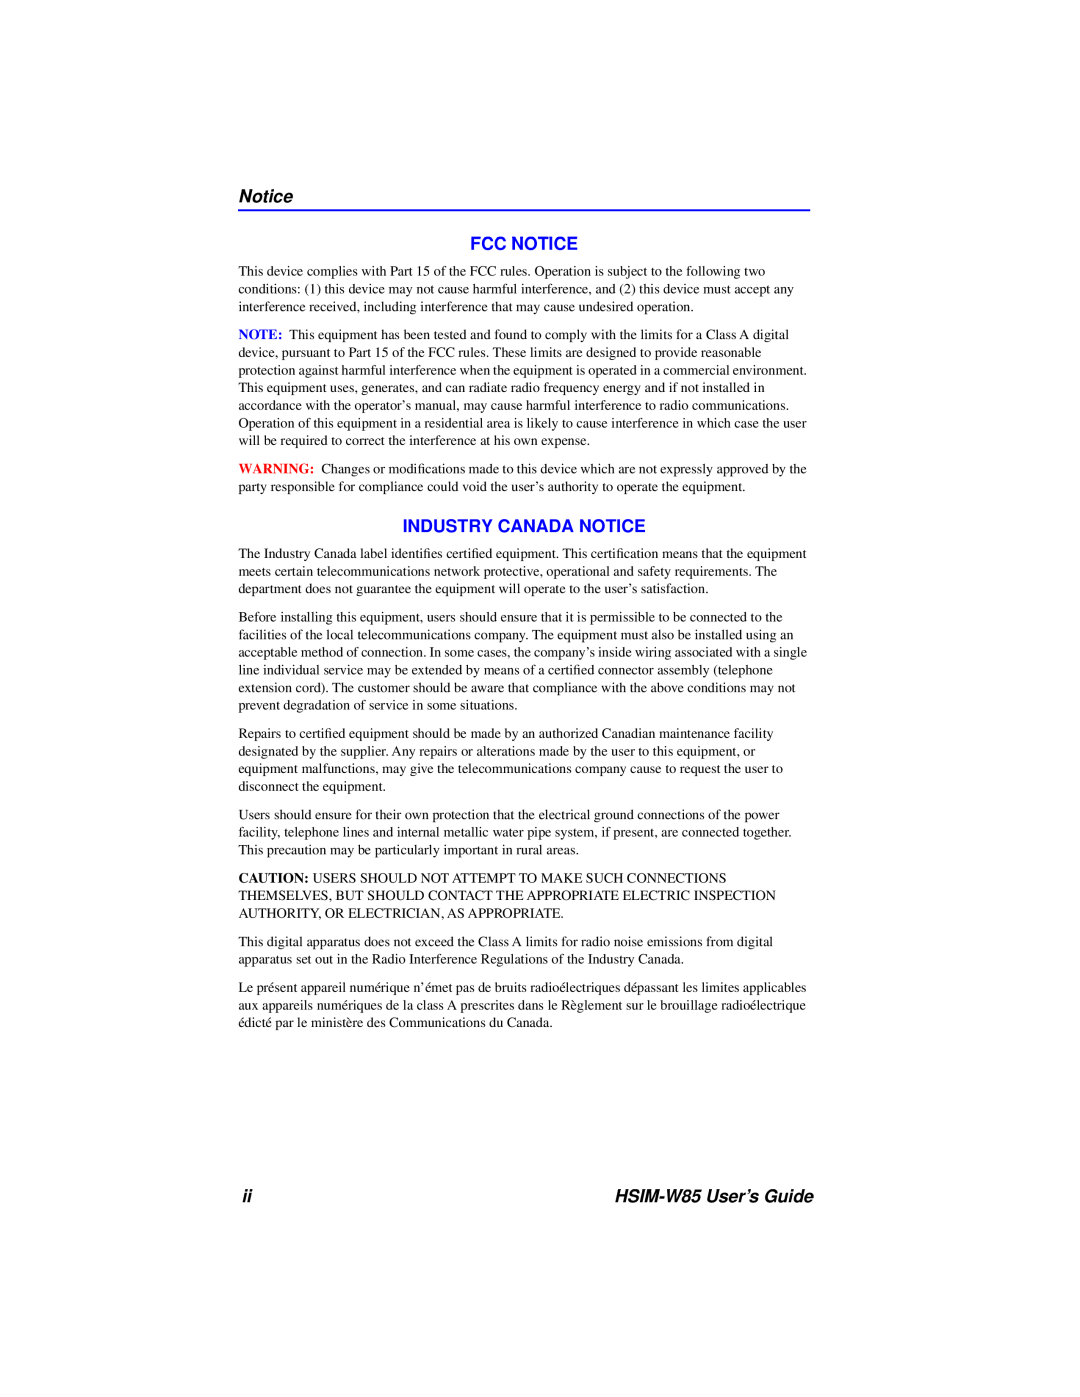 Cabletron Systems manual Fcc Notice, Industry Canada Notice, HSIM-W85 User’s Guide 